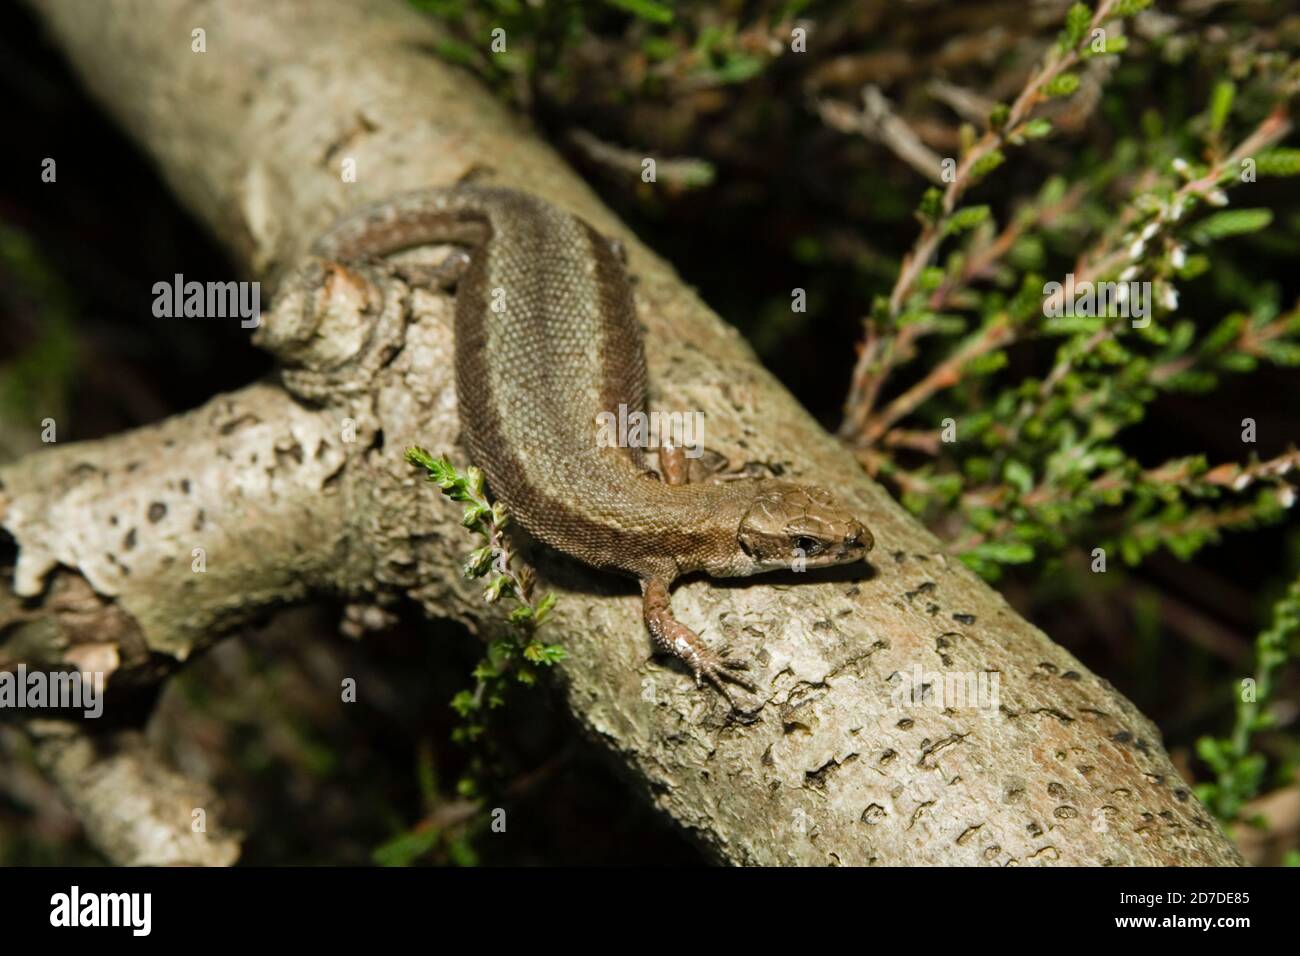 Female Vipiparous or Common Lizard (Lacerta vivipara) sunning itself on dead branch. Hemsted Forest bear Cranbrooke Kent.20.07.2007. Stock Photo